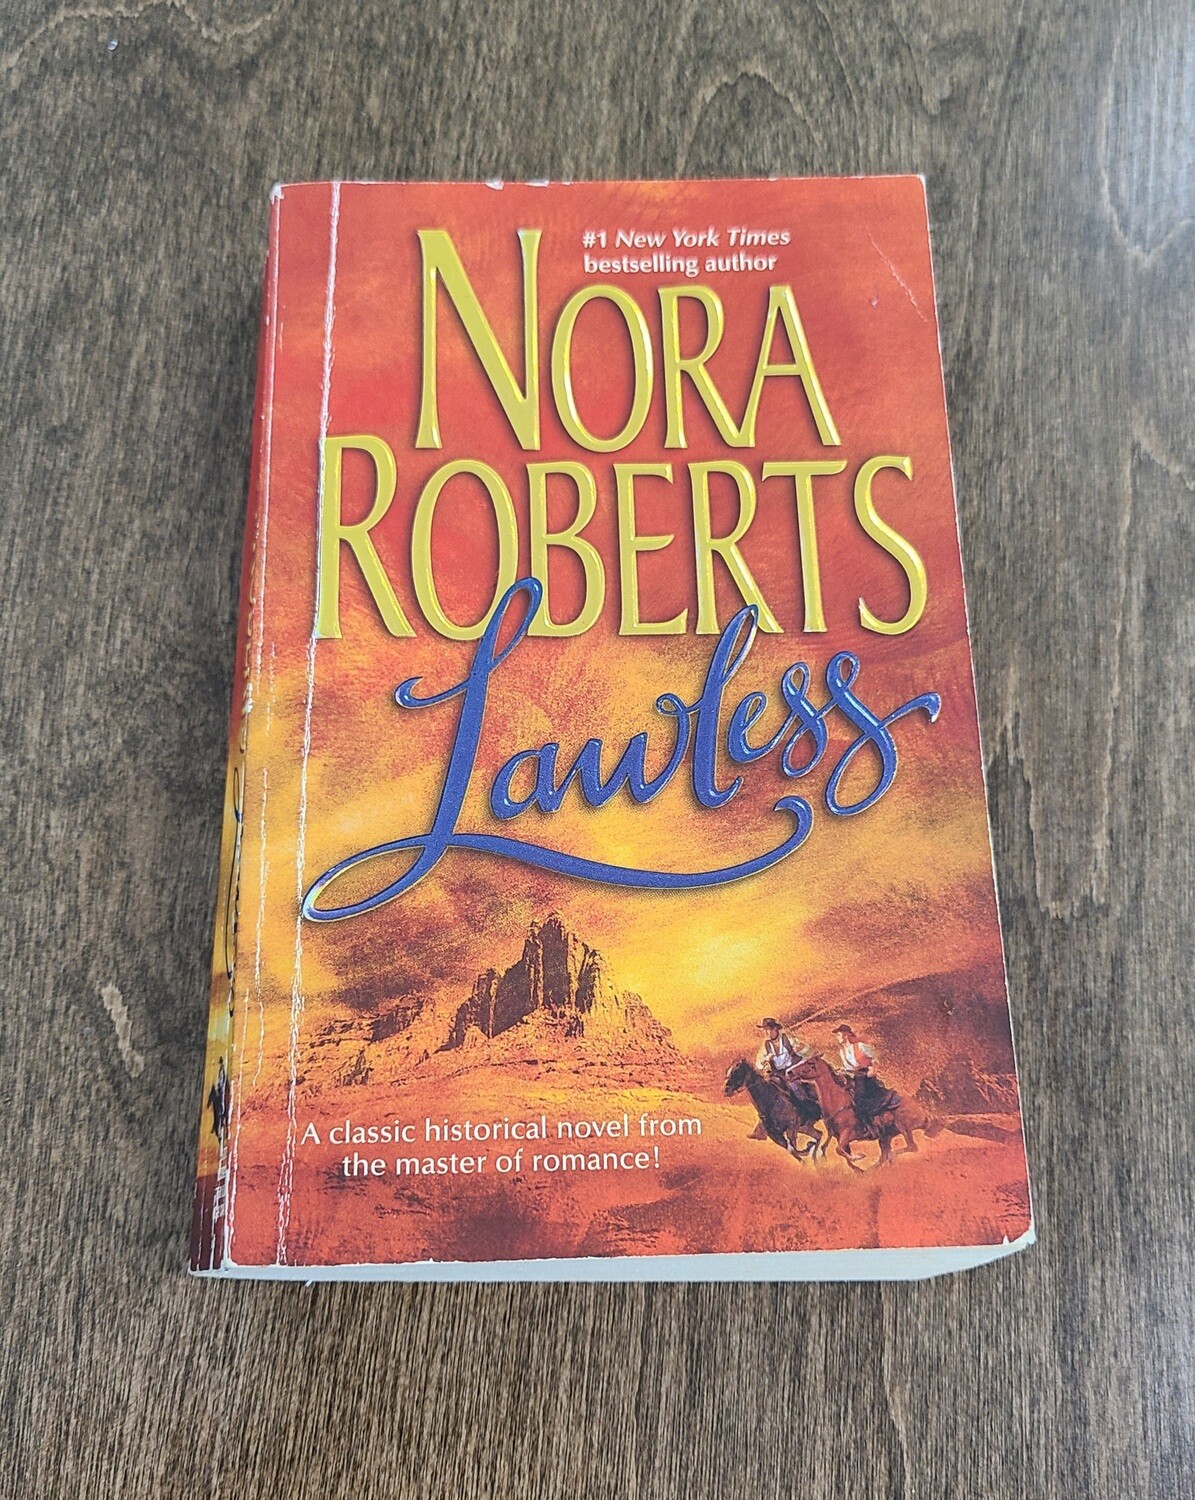 Lawless by Nora Roberts